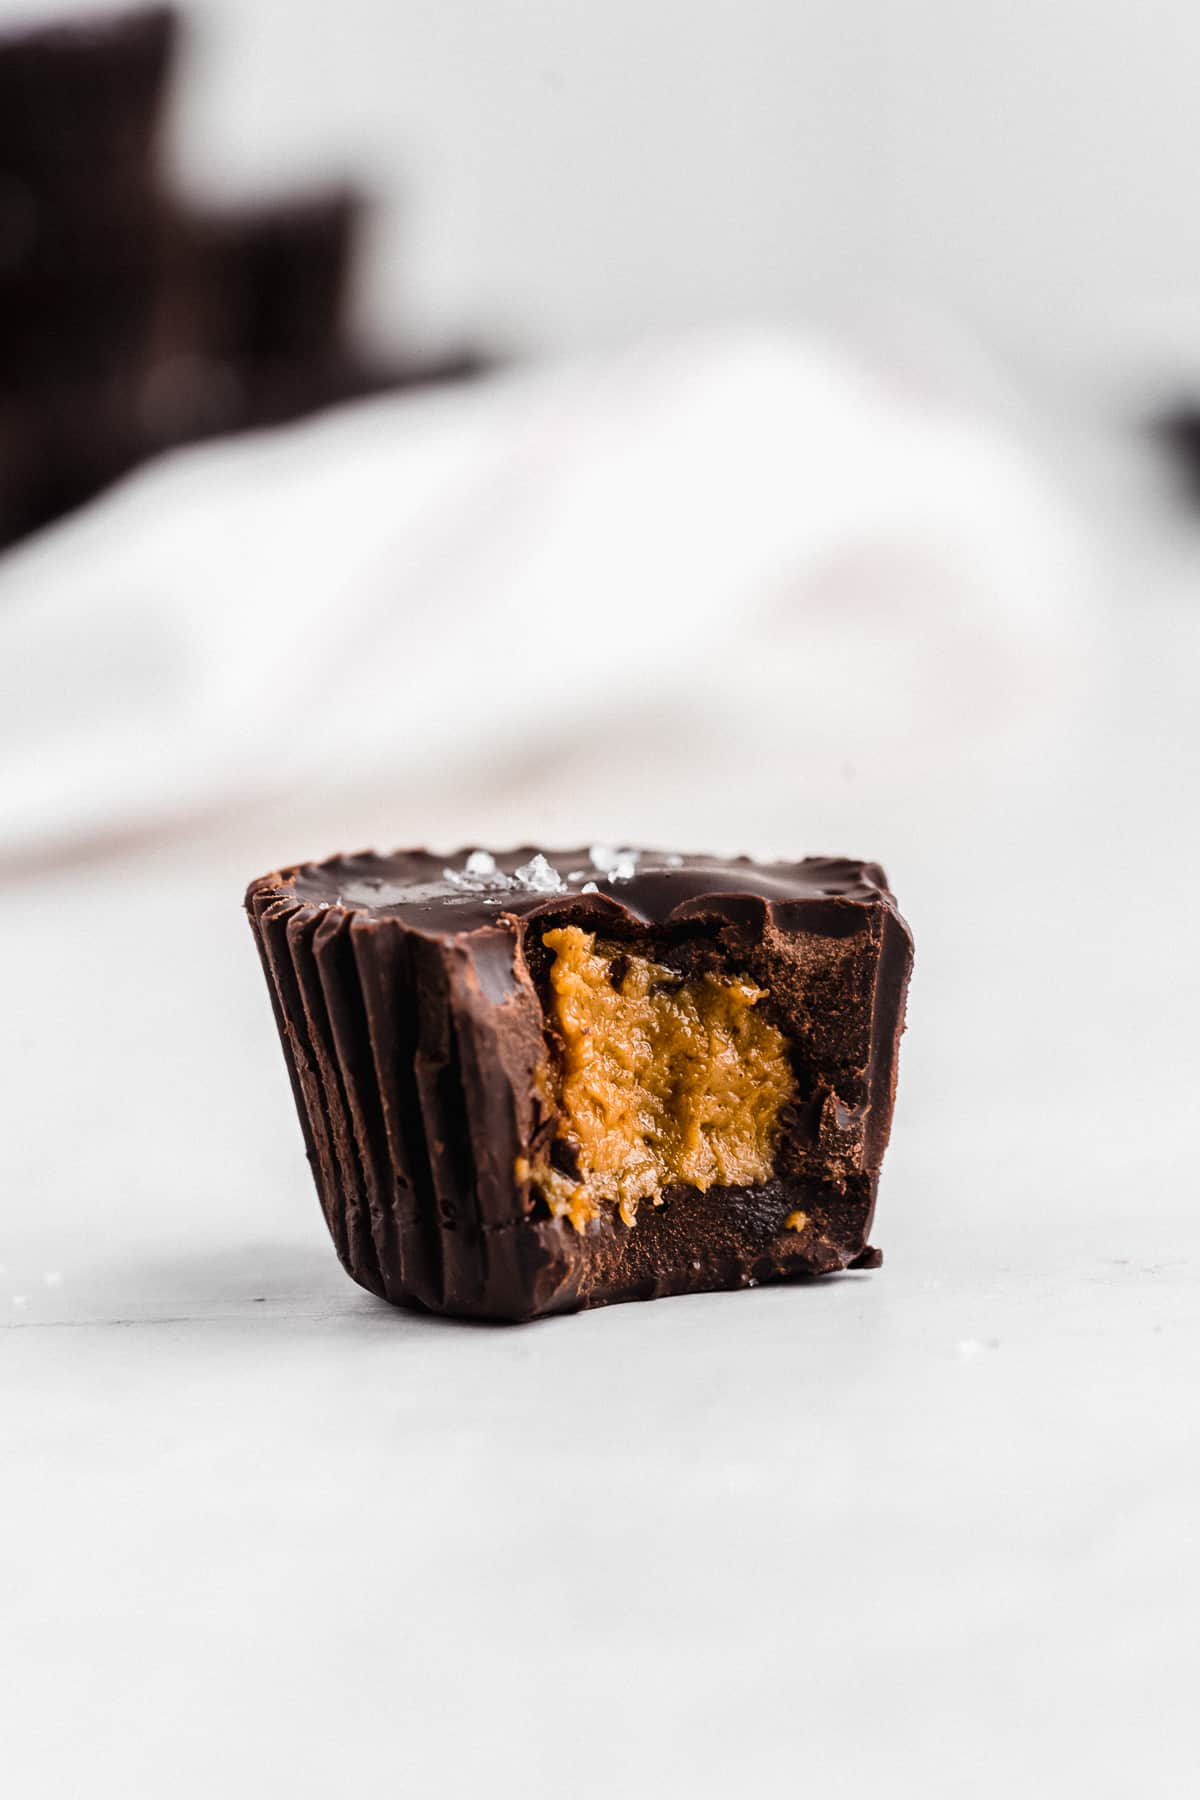 Chocolate pumpkin butter cup on flat surface with bite taken out of it.